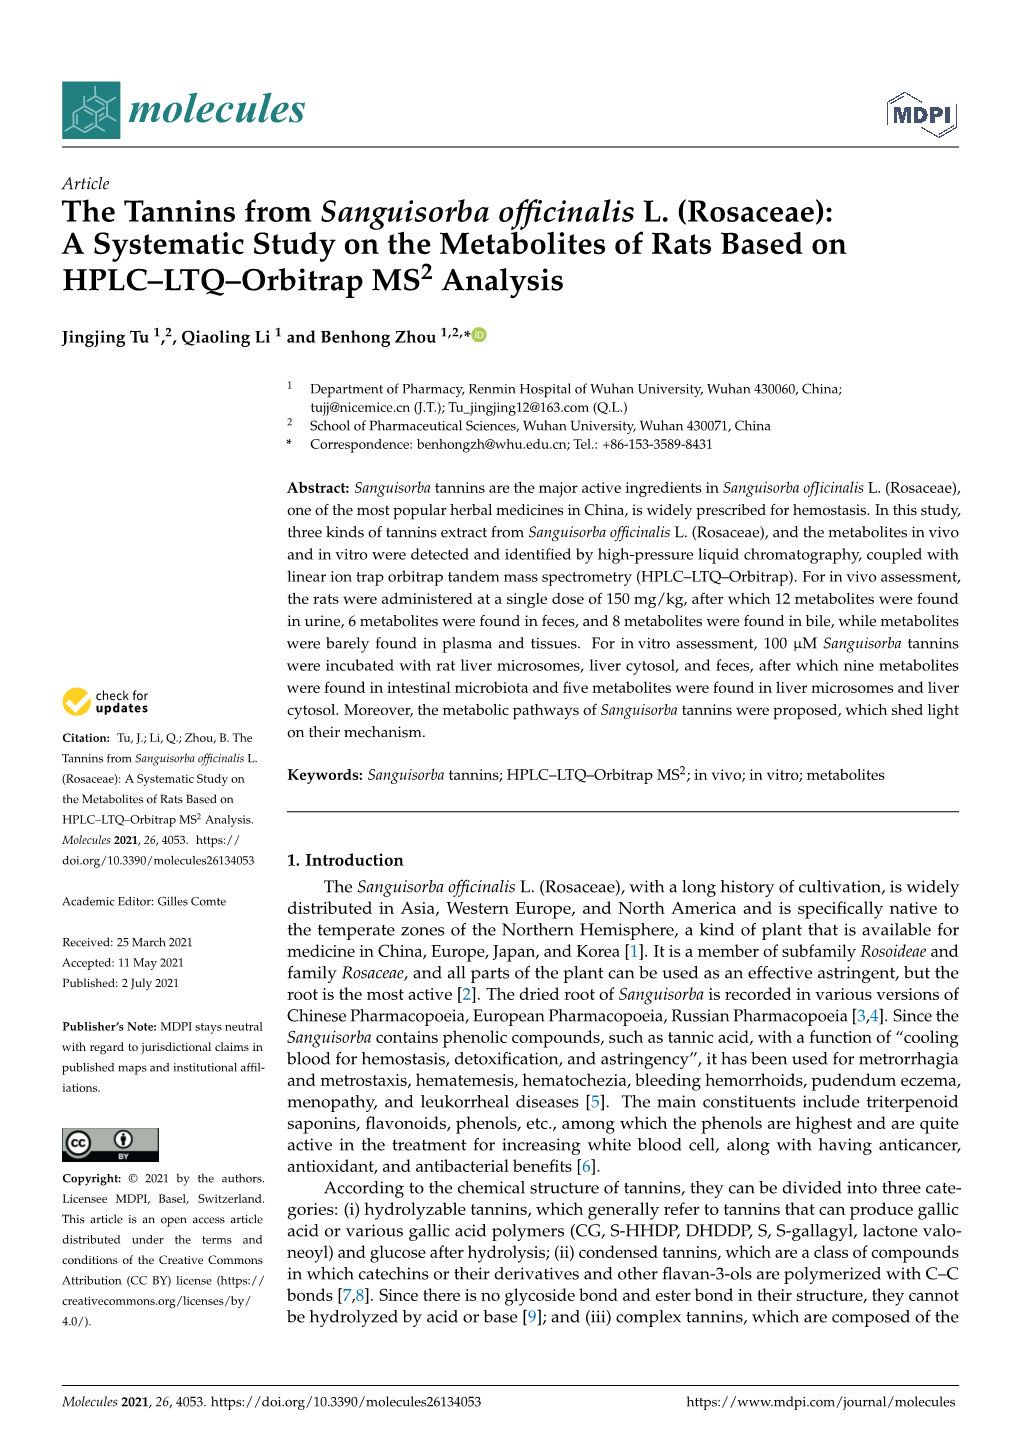 A Systematic Study on the Metabolites of Rats Based on HPLC–LTQ–Orbitrap MS2 Analysis